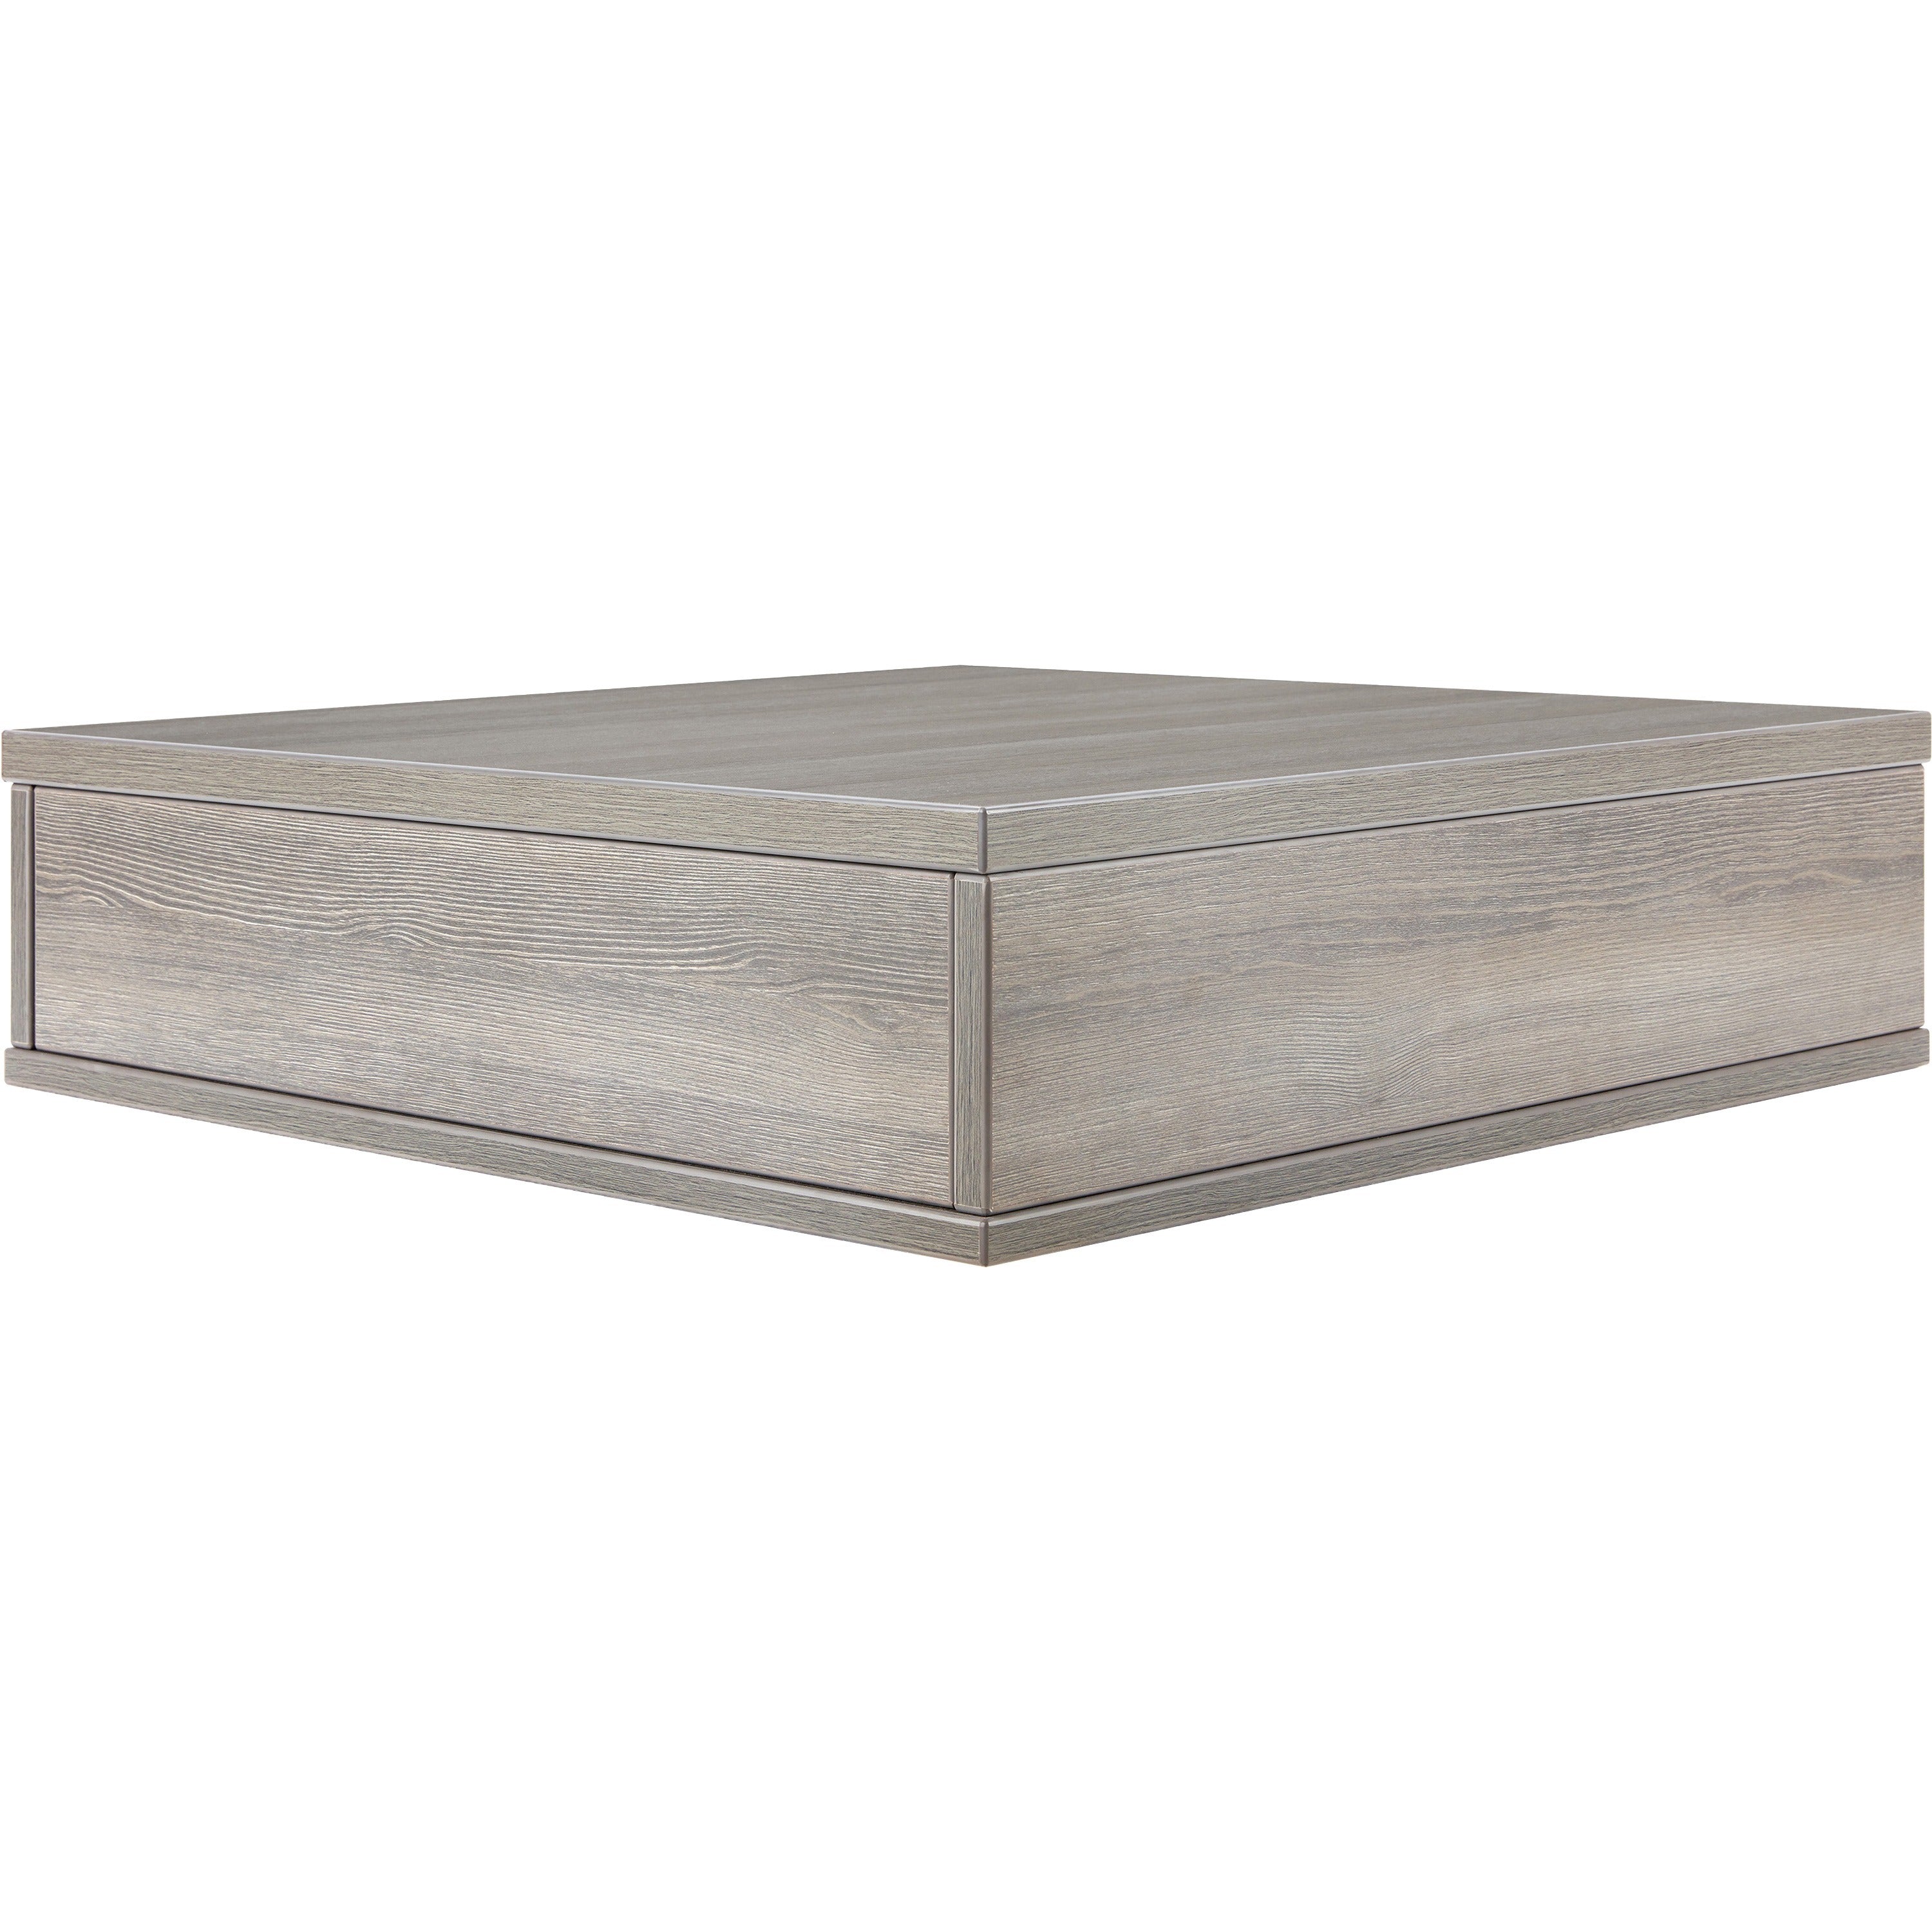 lorell-contemporary-reception-collection-sectional-tabletop-253-x-25566-finish-weathered-charcoal-laminate_llr86935 - 1